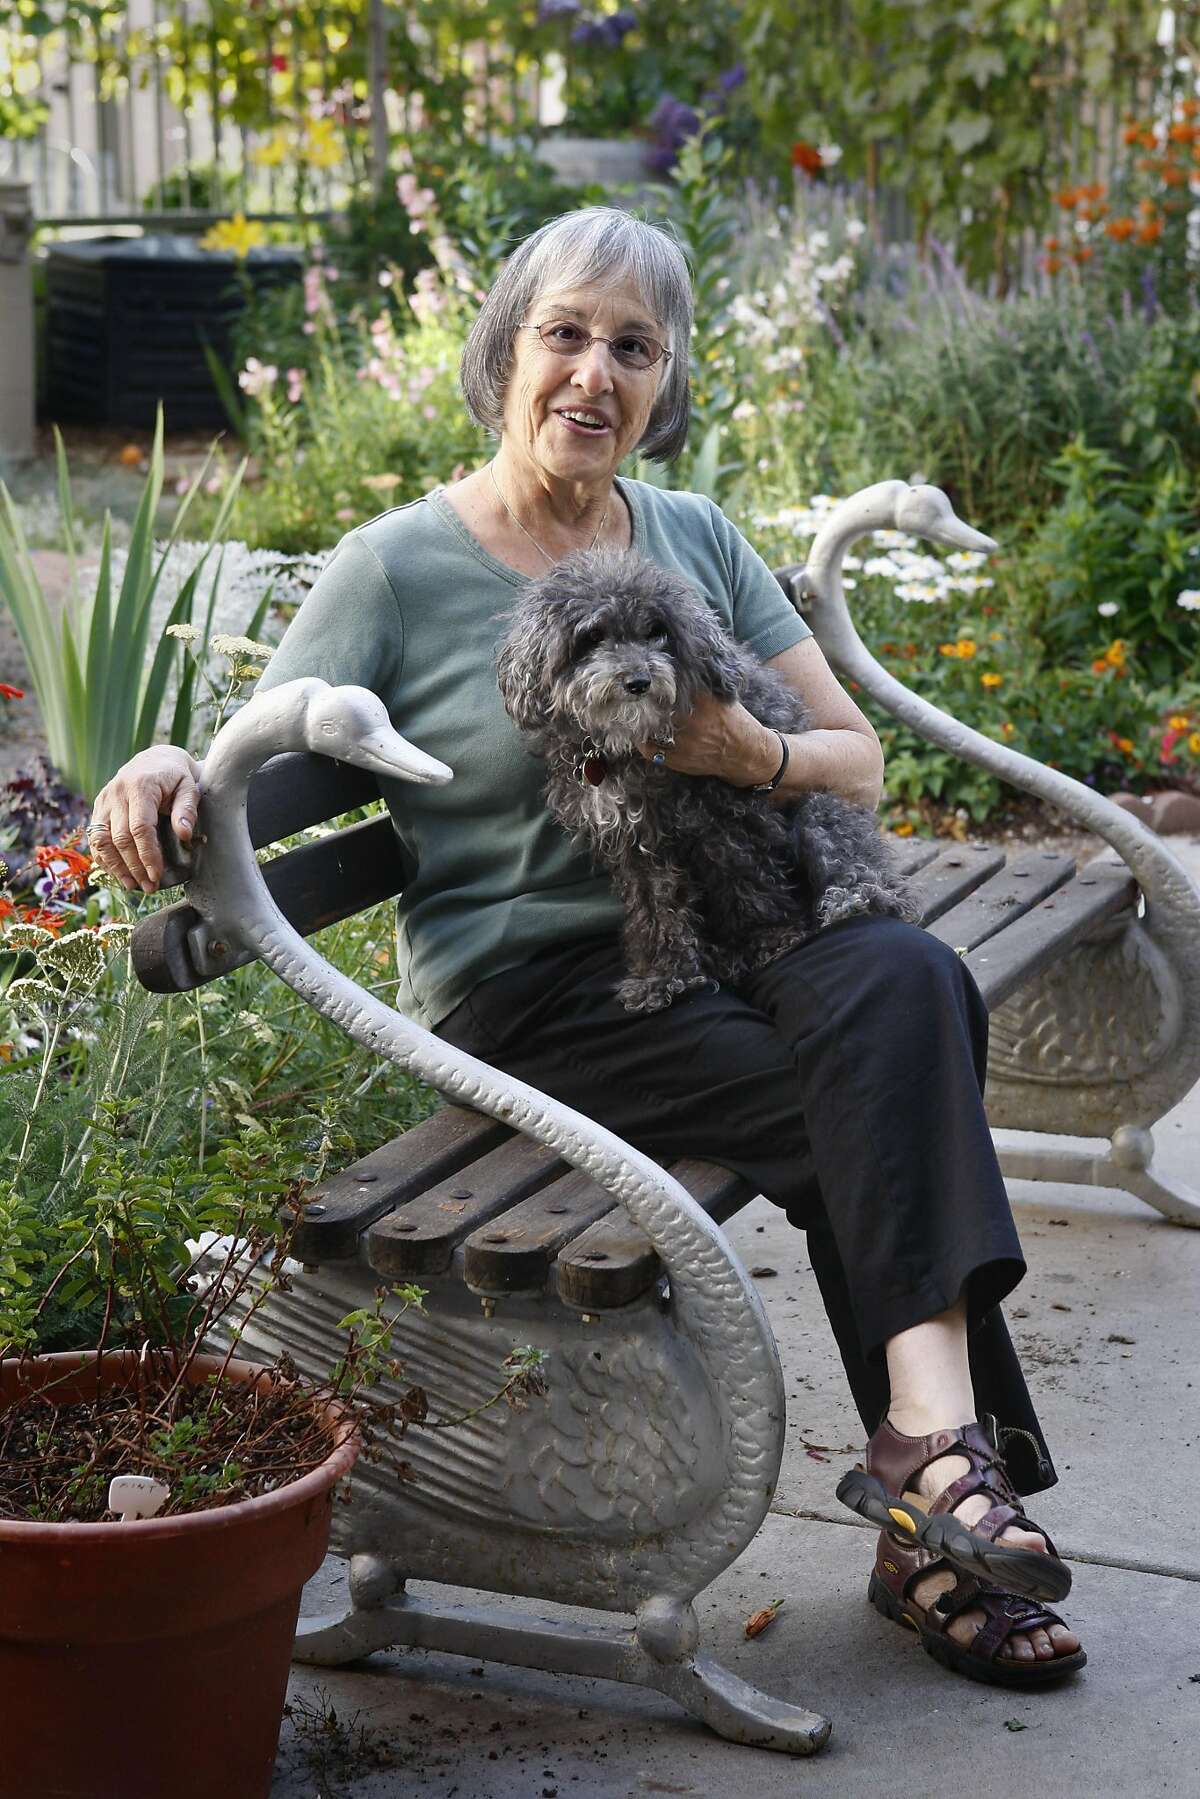 Joani Blank, who was the founder of Good Vibrations, is retired in Oakland, Calif., on Thursday, July 2, 2009. She is with her poodle, Bapu-Ji.